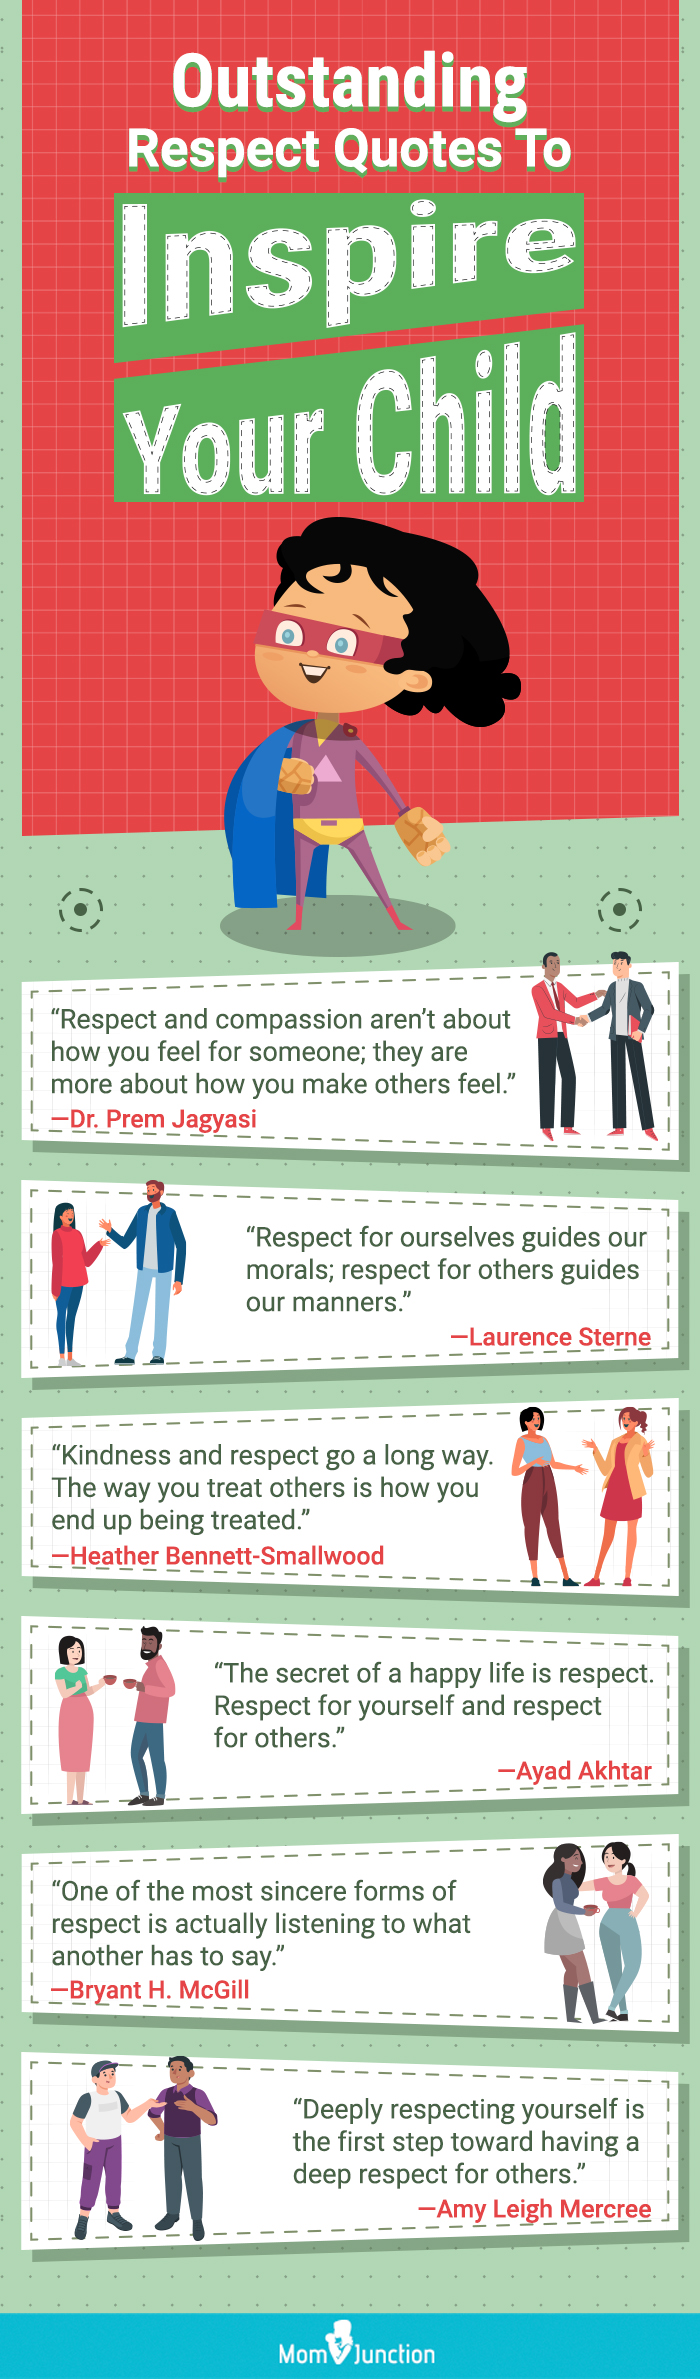 outstanding respect quotes to inspire your child (infographic)